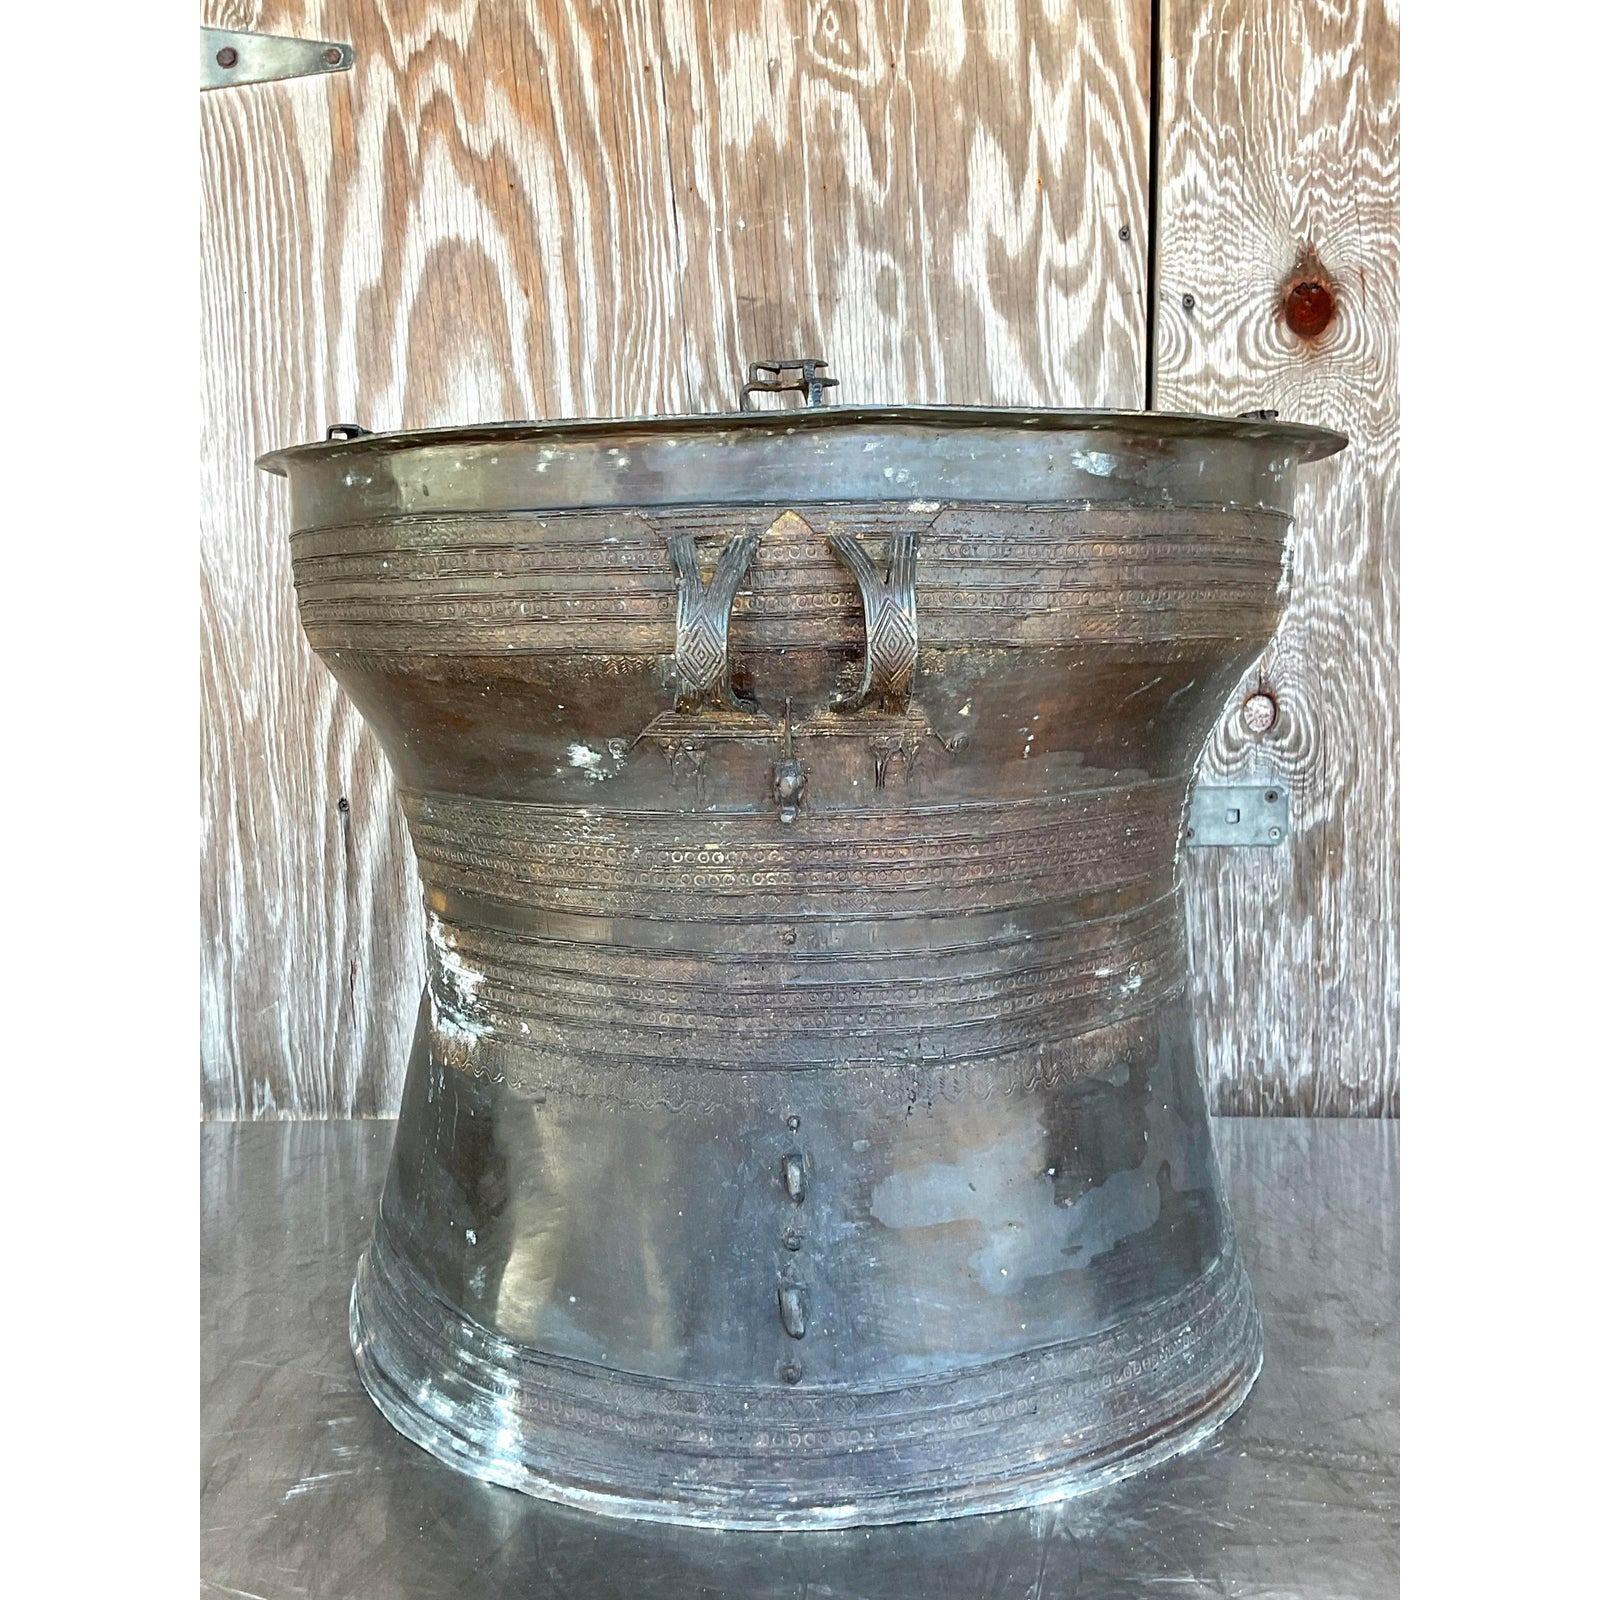 A stunning vintage Boho rain drum a chic patinated bronze frame with highly detail metal work. An incredible all over patinated finish from time and age. Acquired from a Palm Beach estate.

The rain drum is in great vintage condition. Scuffs and